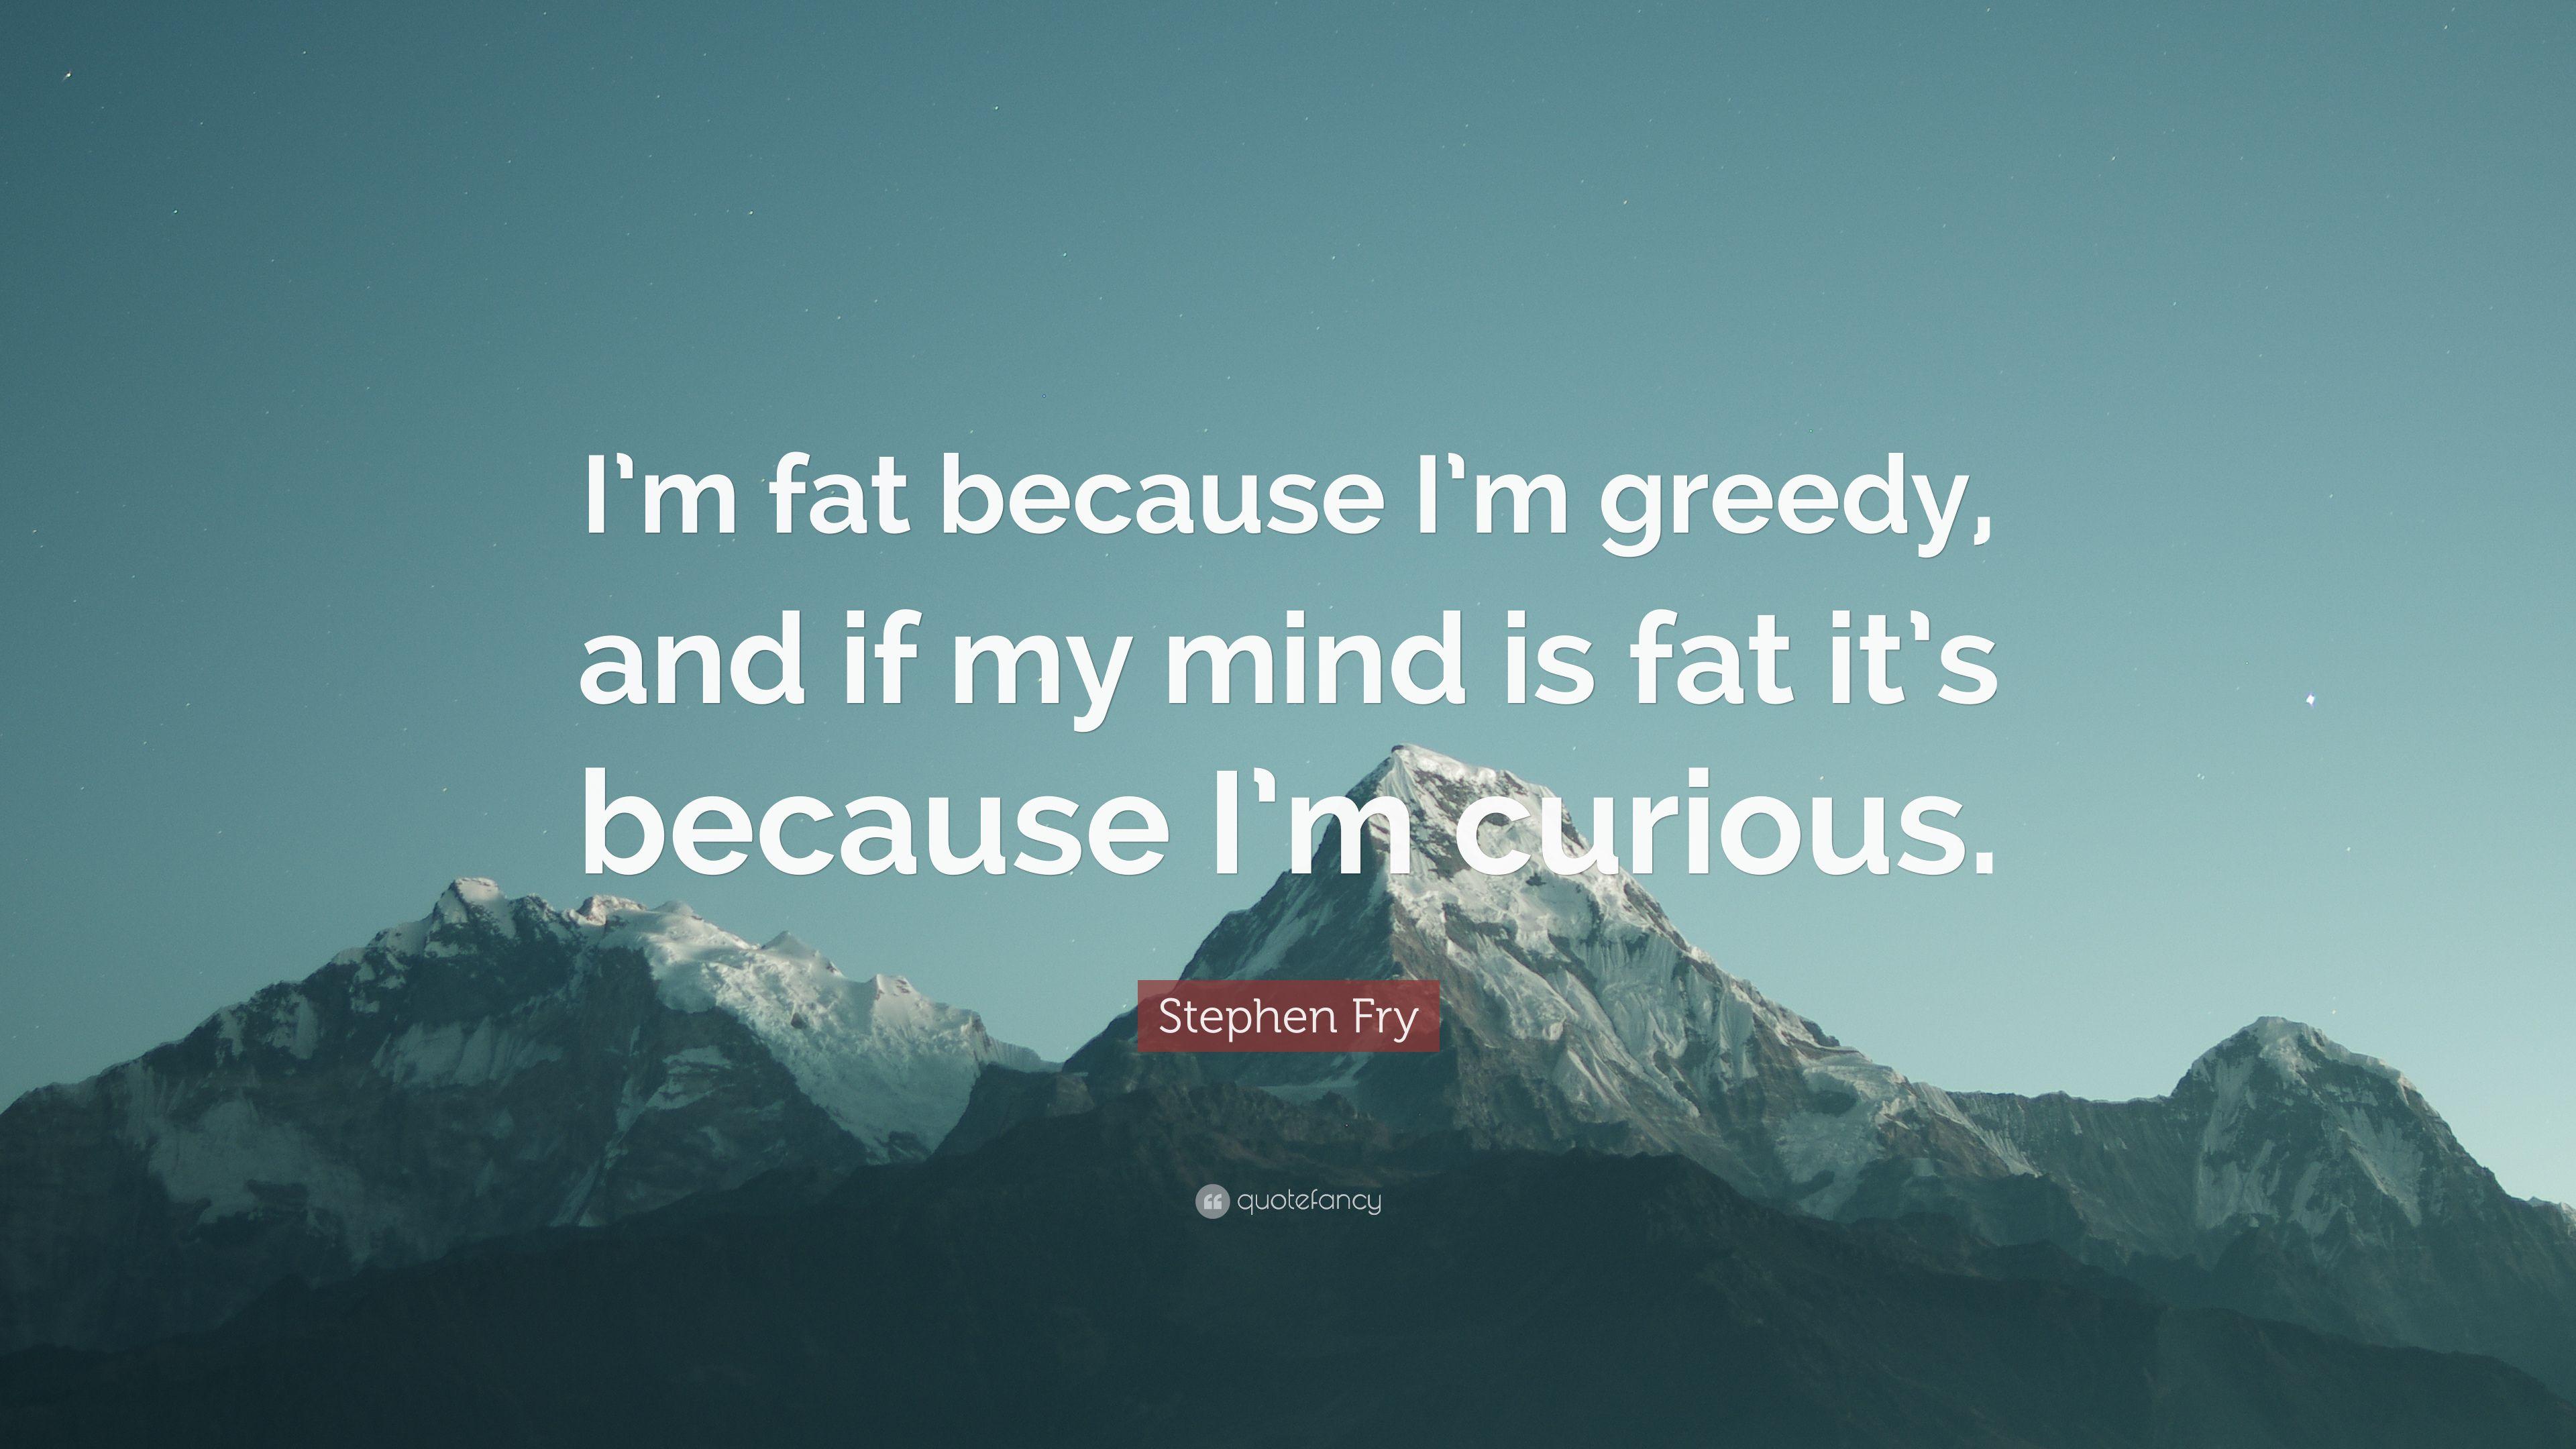 Stephen Fry Quote: “I'm fat because I'm greedy, and if my mind is